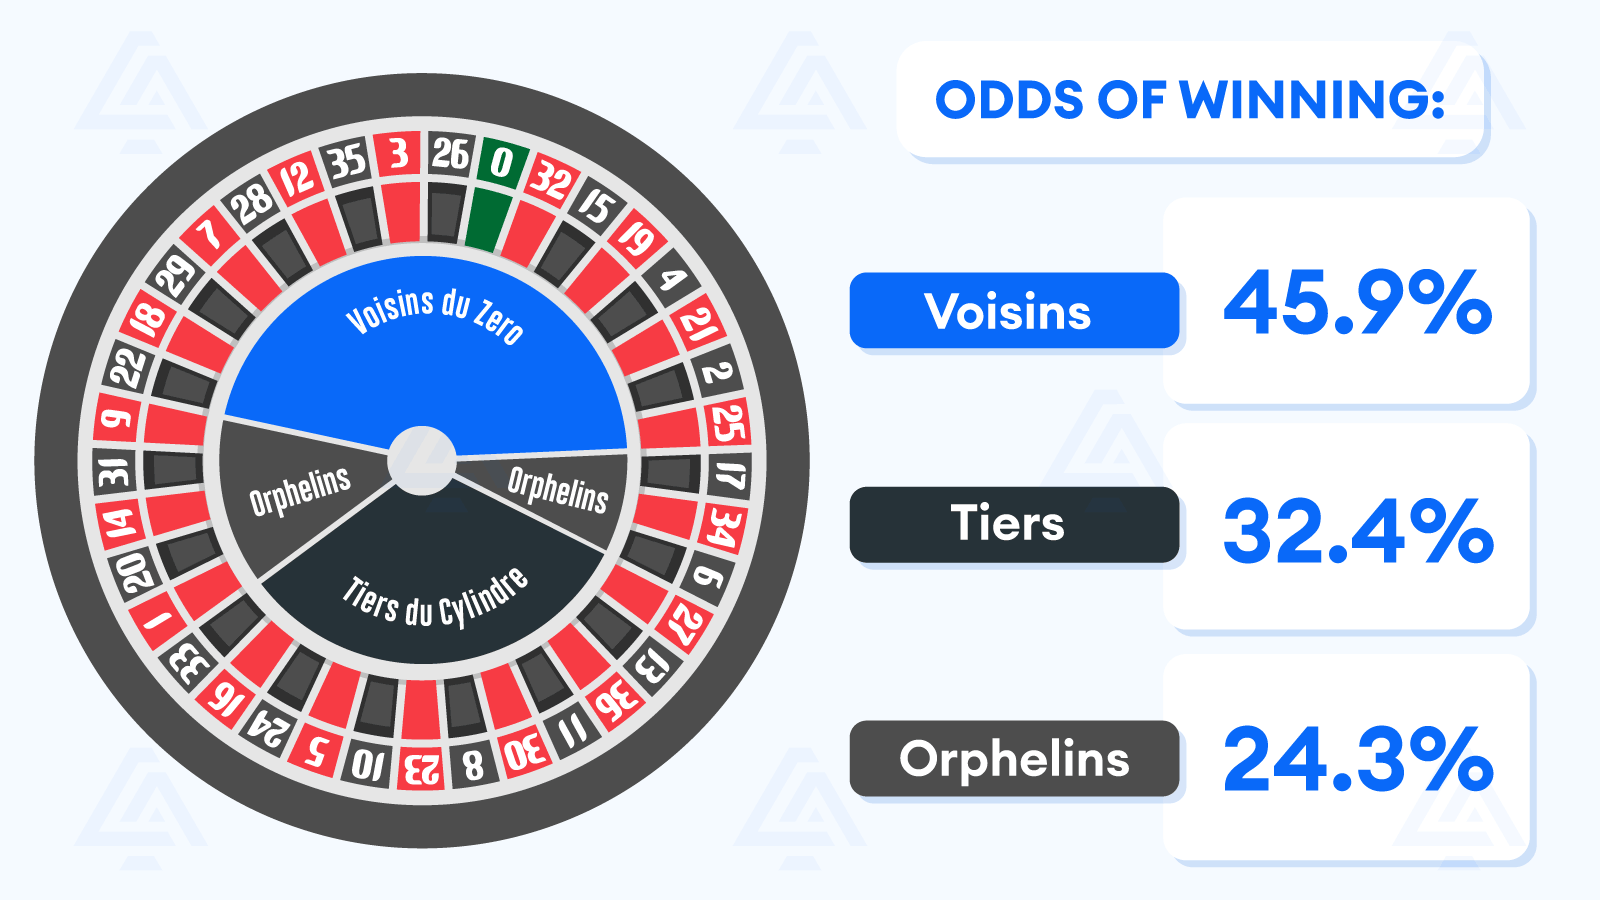 Compare the odds of winning for exotic bets